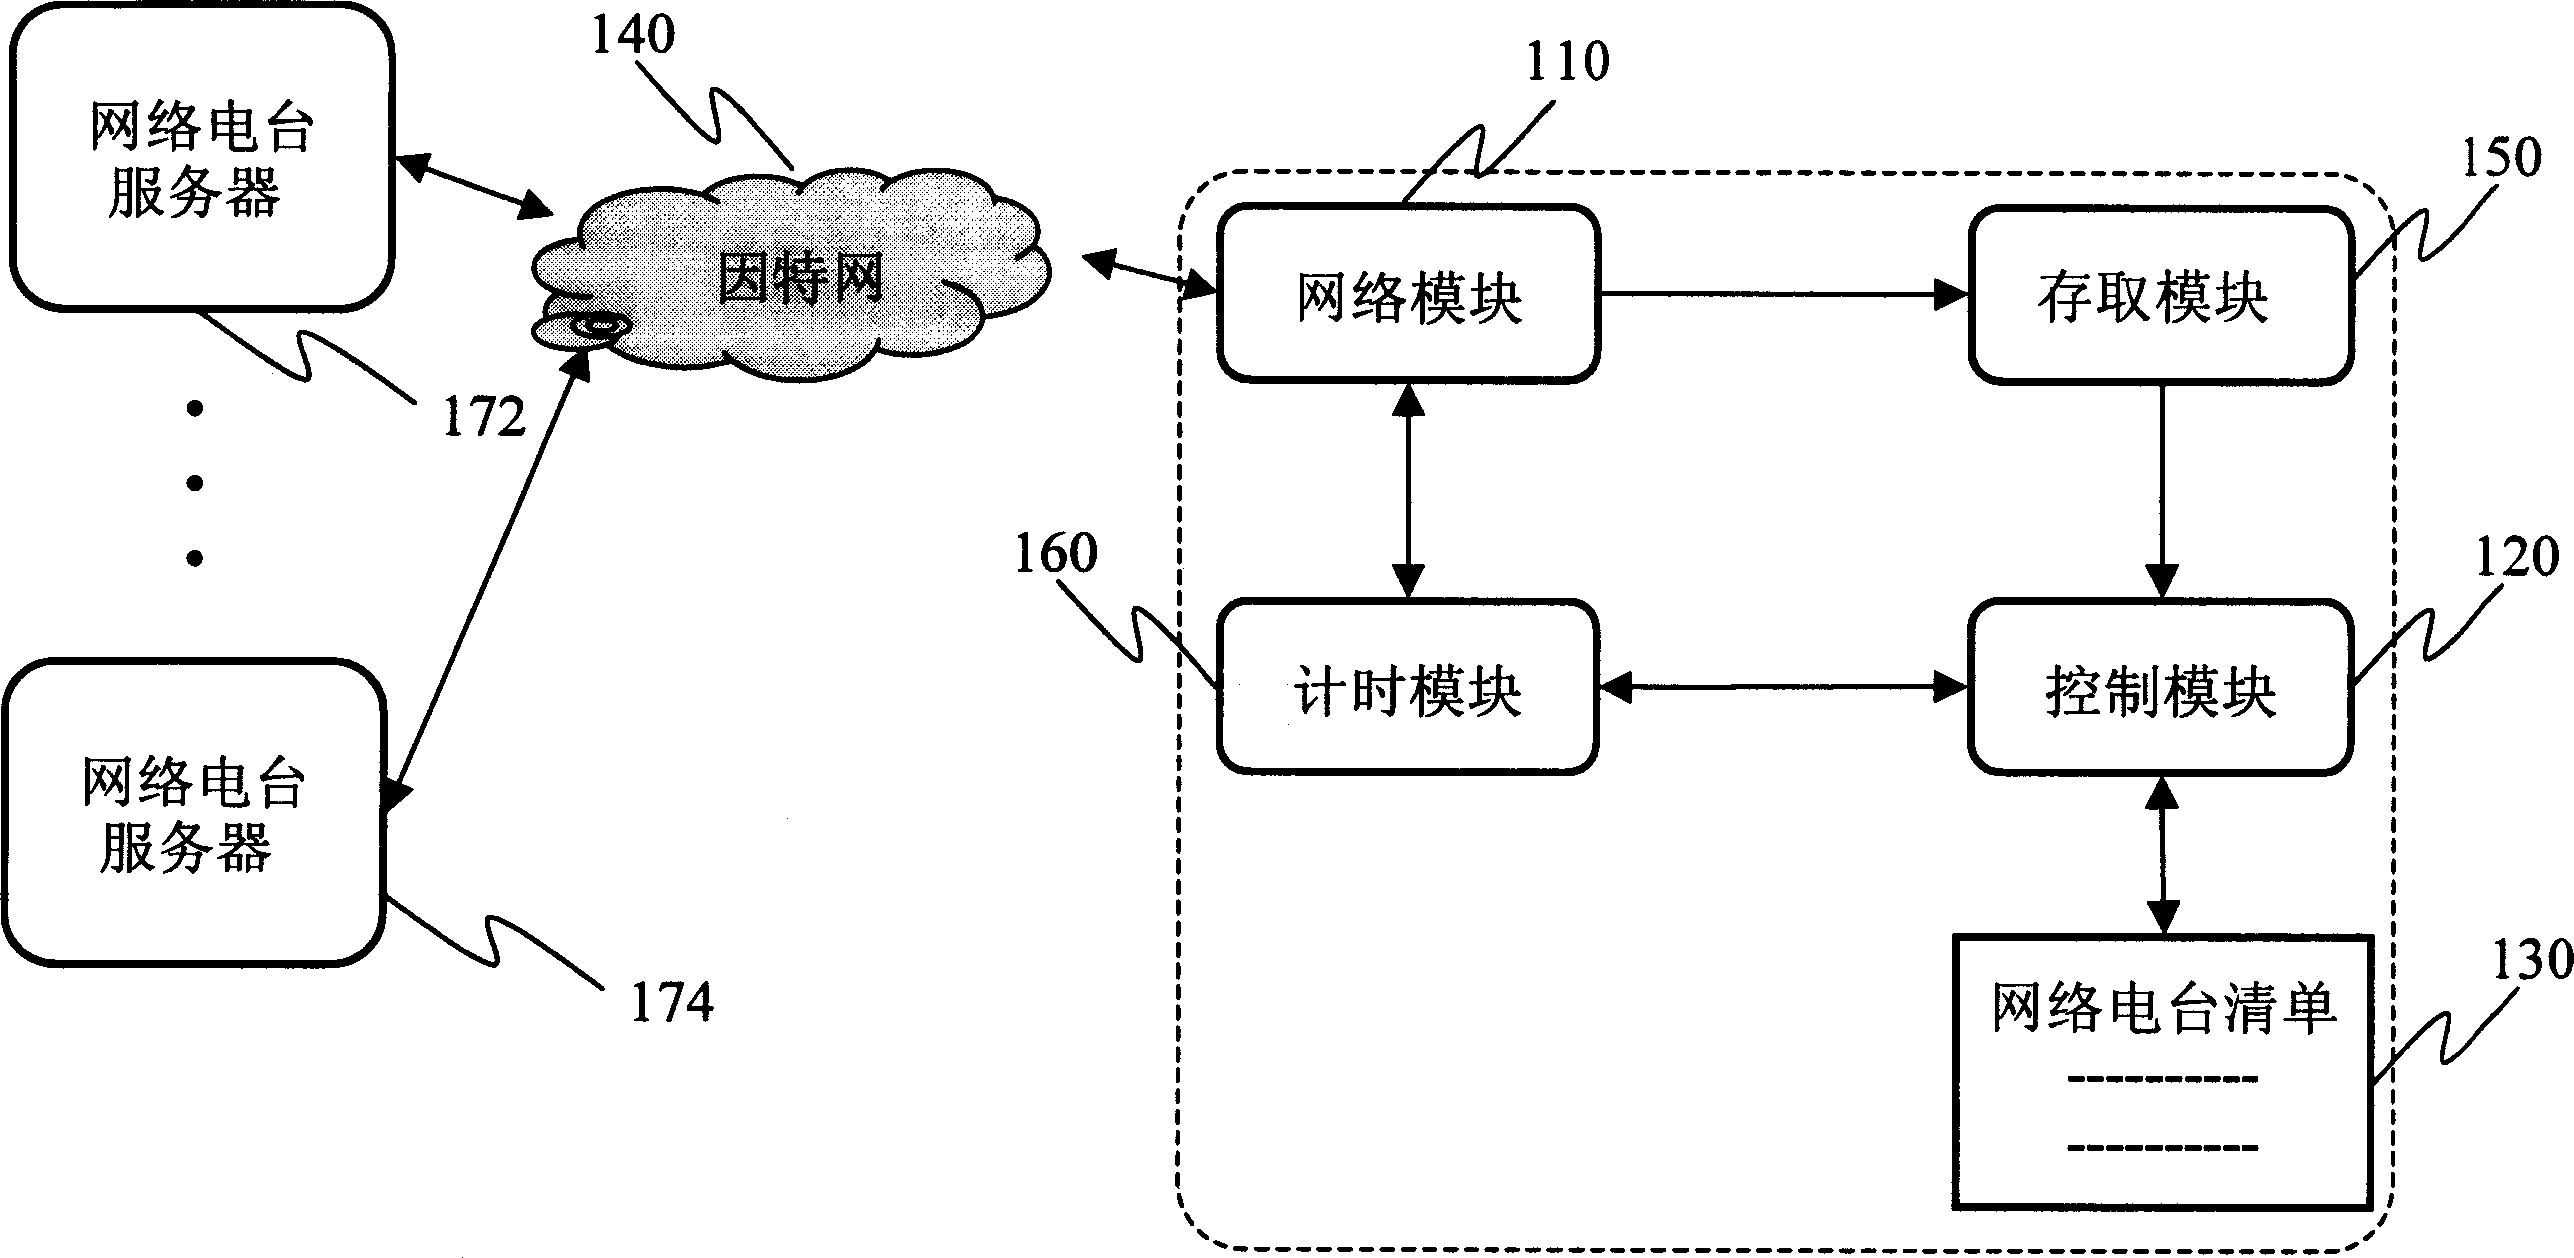 System and method for switching over automatically among multiple group network tranceivers